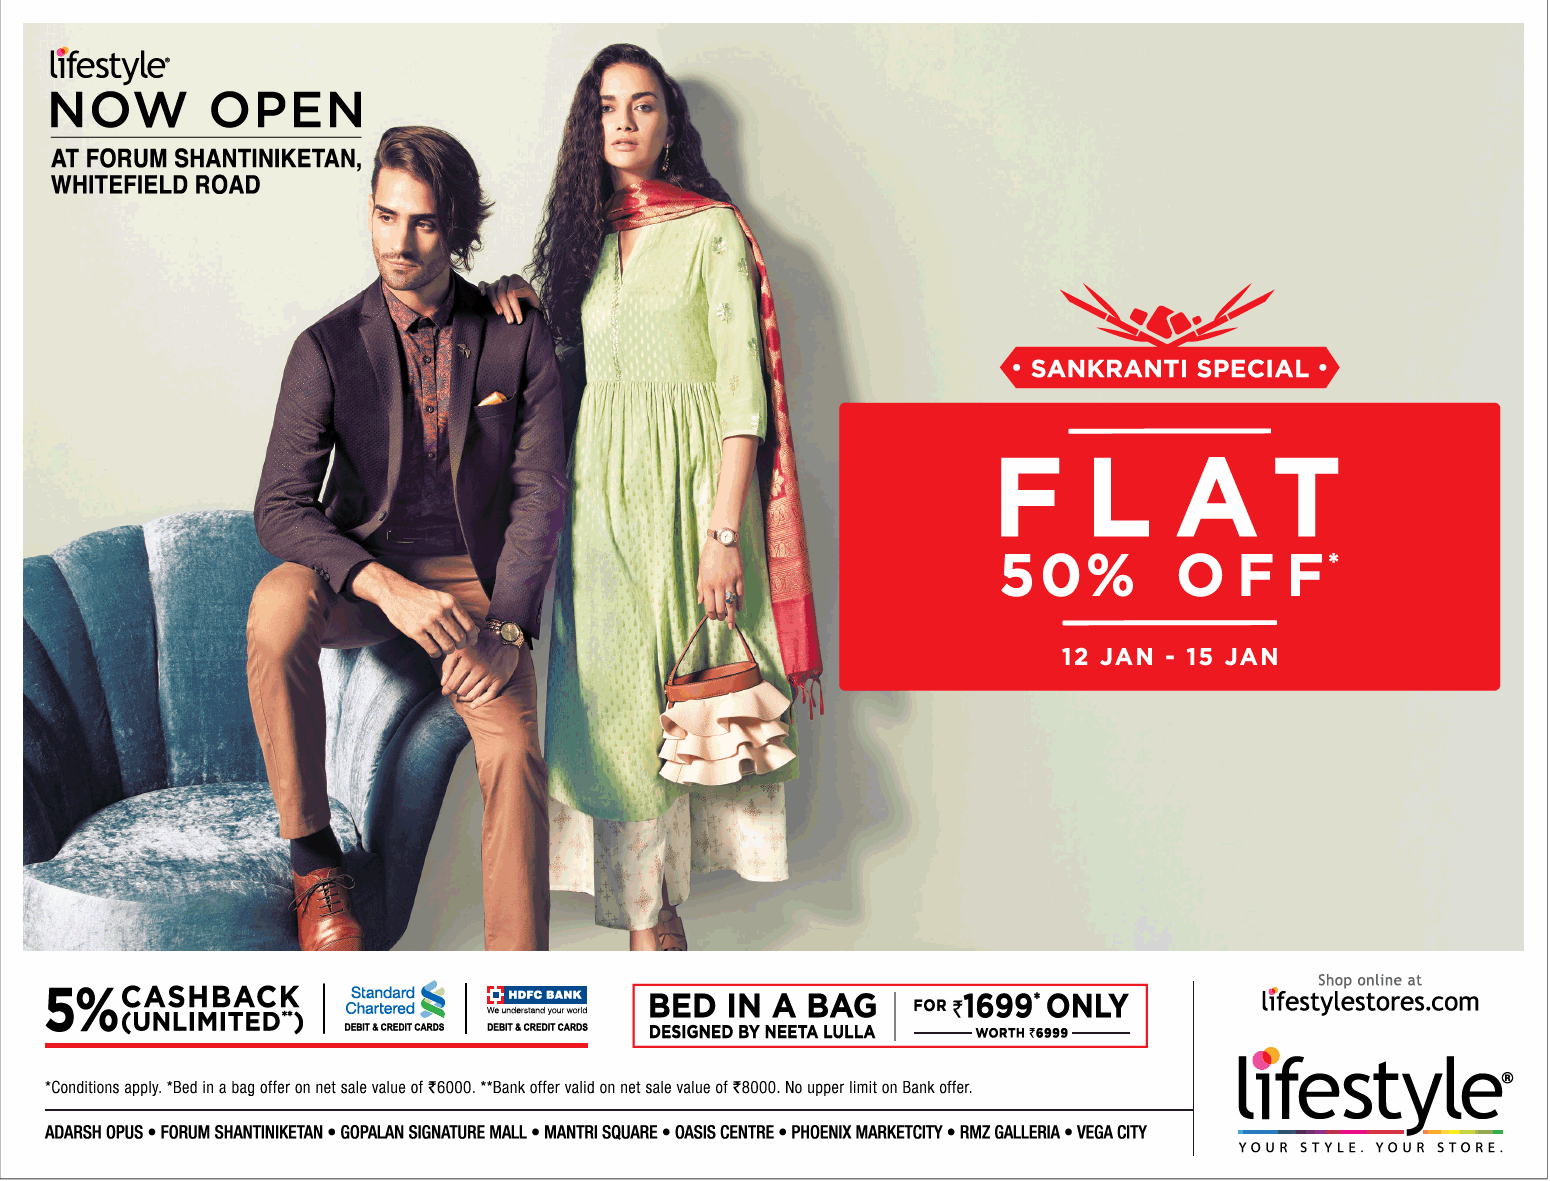 lifestyle-sankranti-special-flat-50%-off-ad-bangalore-times-12-01-2019.png